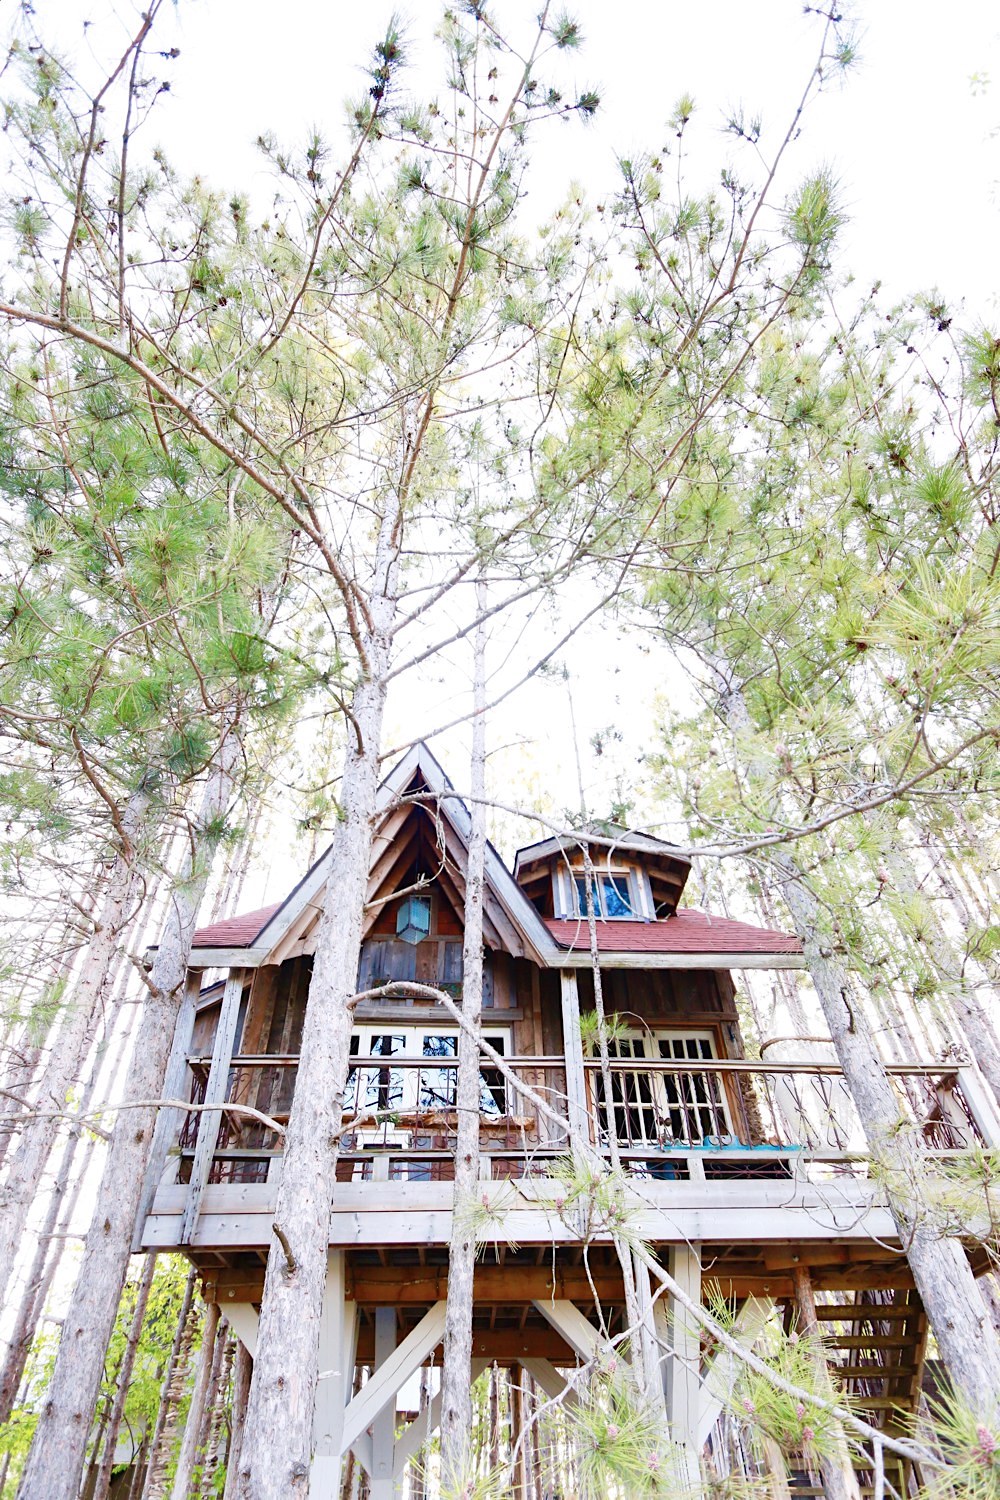 Rent the treehouse retreat via @lynneknowlton ...cabin and treehouse vacation rental on DESIGN THE LIFE YOU WANT TO LIVE